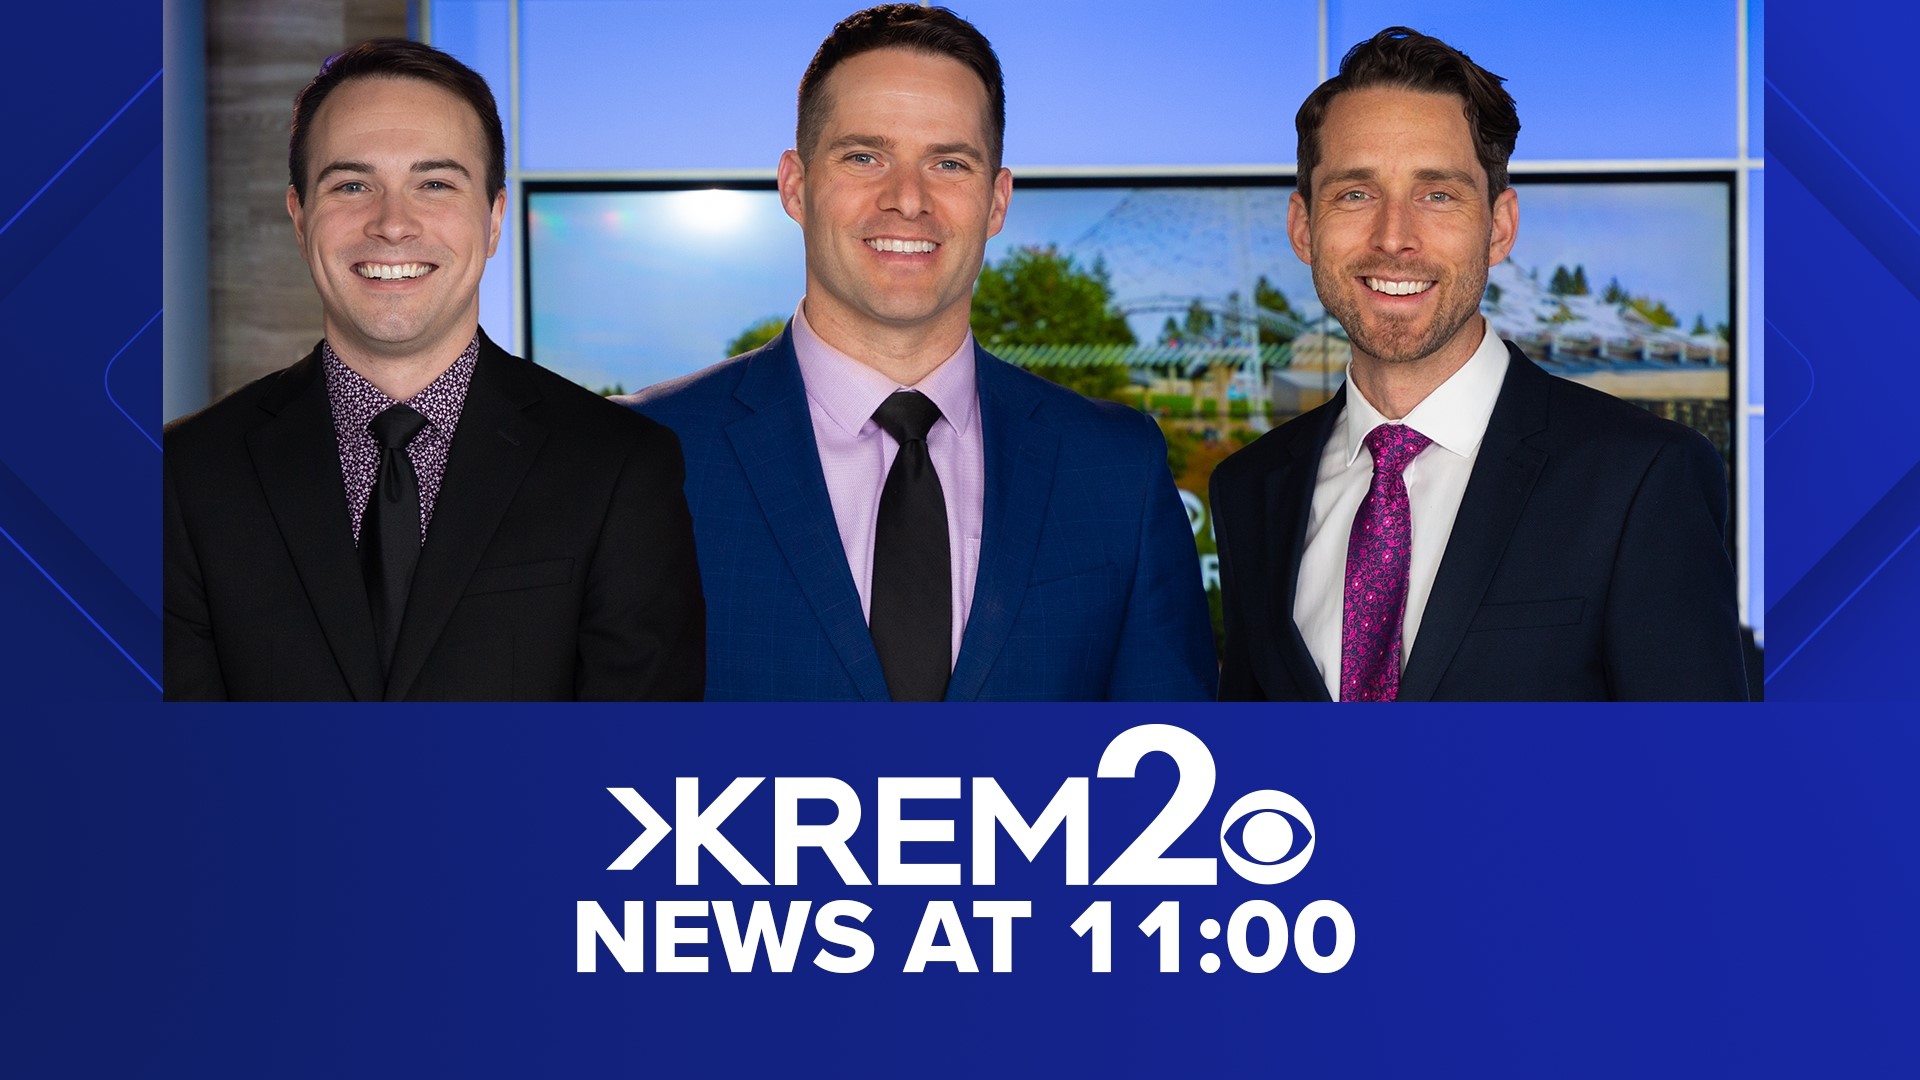 KREM 2 News provides a look at the day's biggest headlines, a look ahead to what's happening tomorrow, and the latest weather and sports.